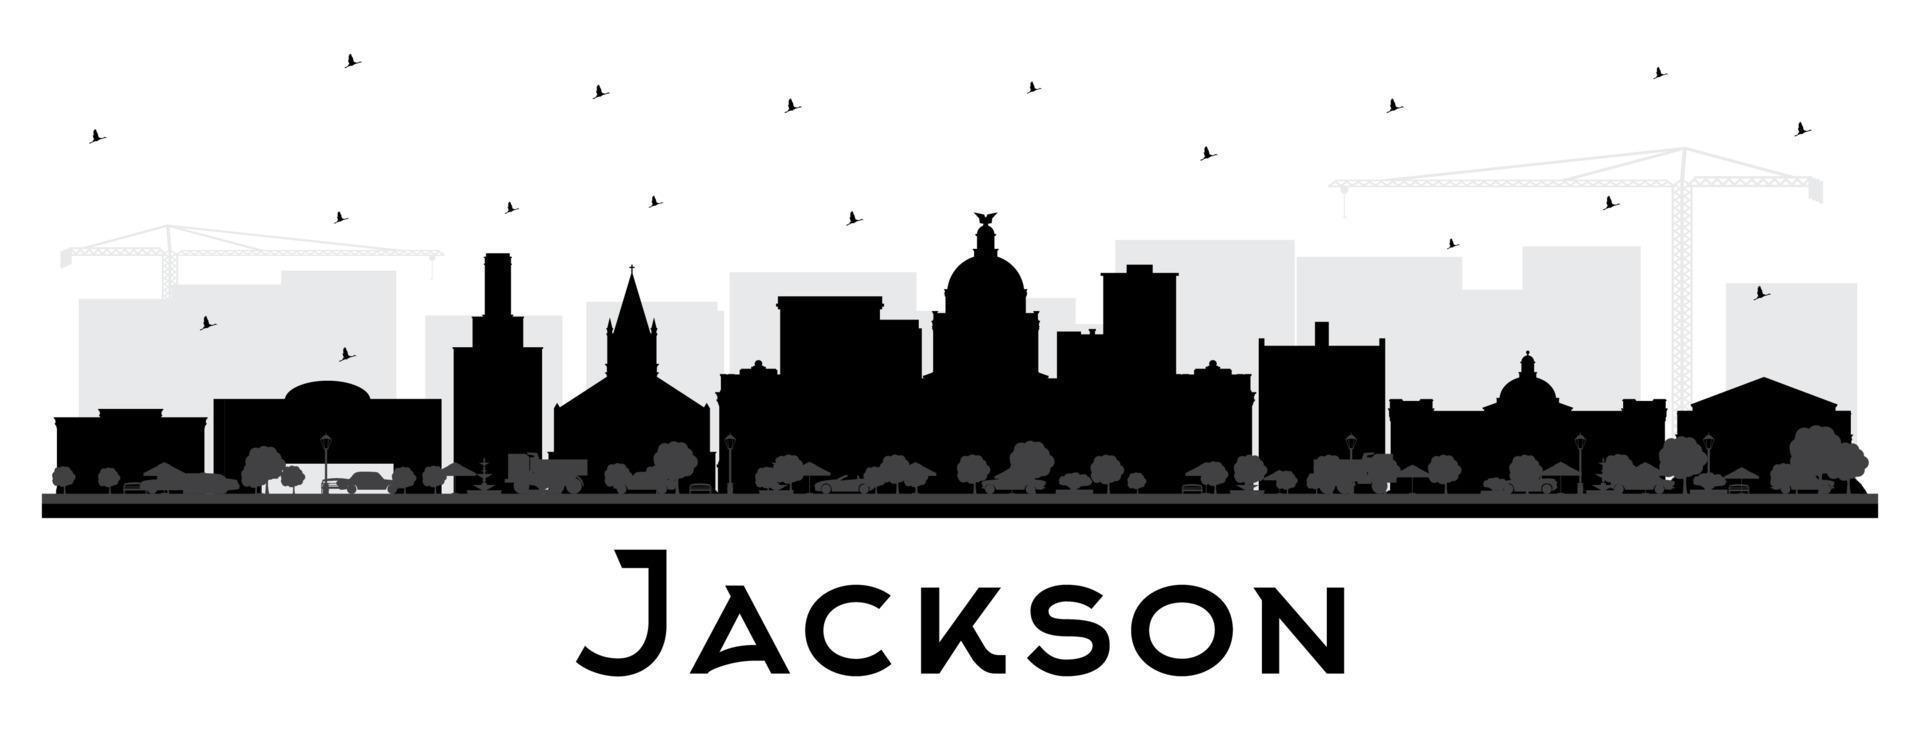 Jackson Mississippi City Skyline Silhouette with Black Buildings Isolated on White. vector